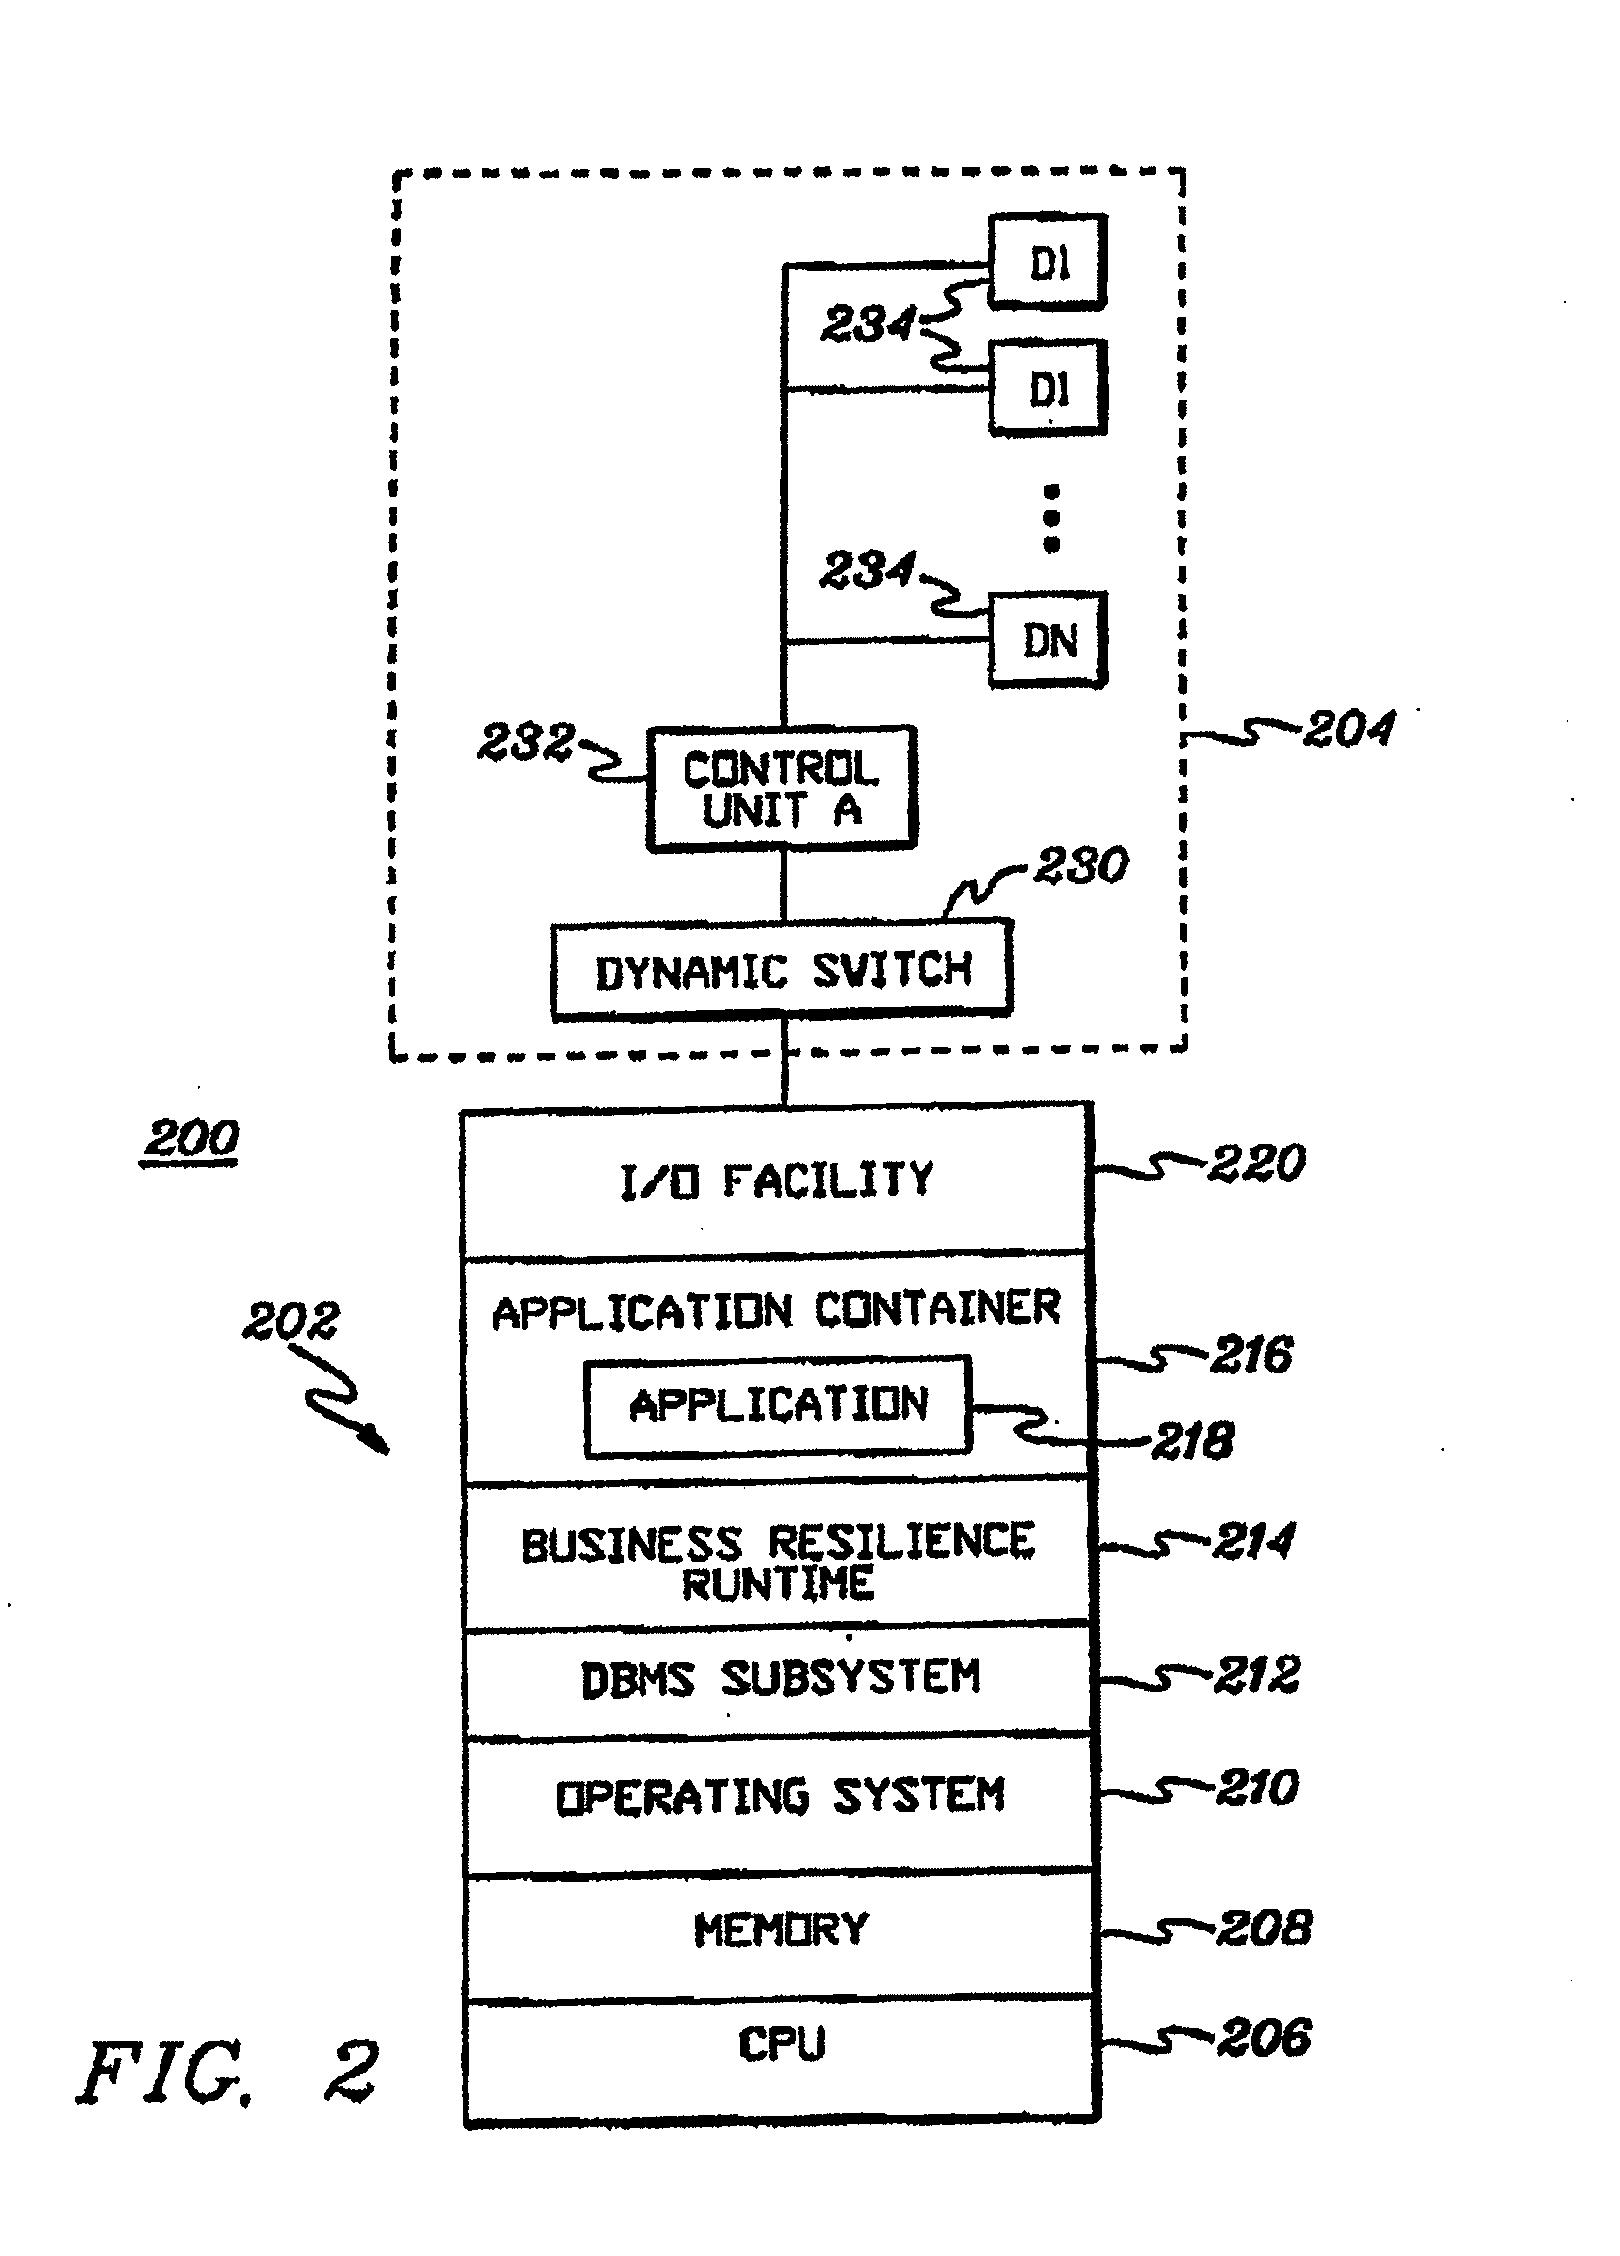 Use of multi-level state assessment in computer business environments